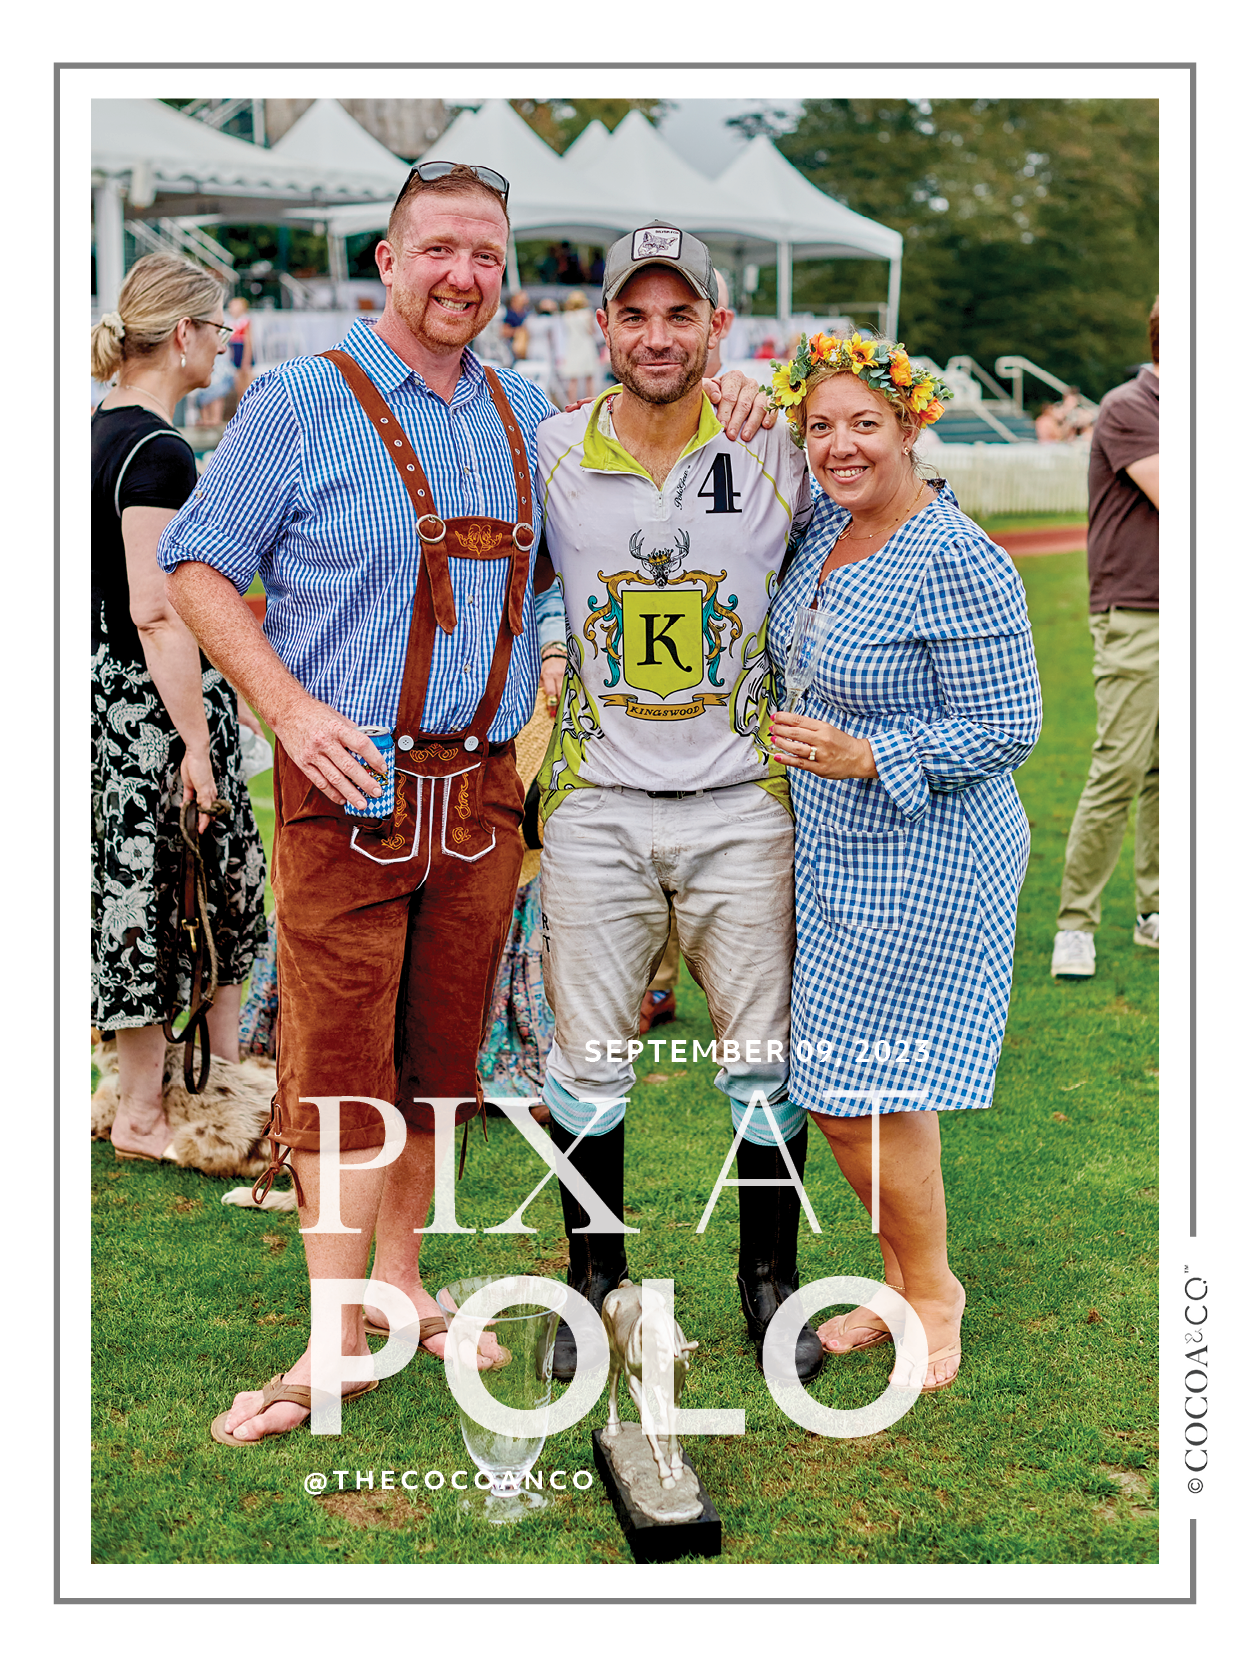 Newport Polo Benefit Match for Rotary Club of Newport